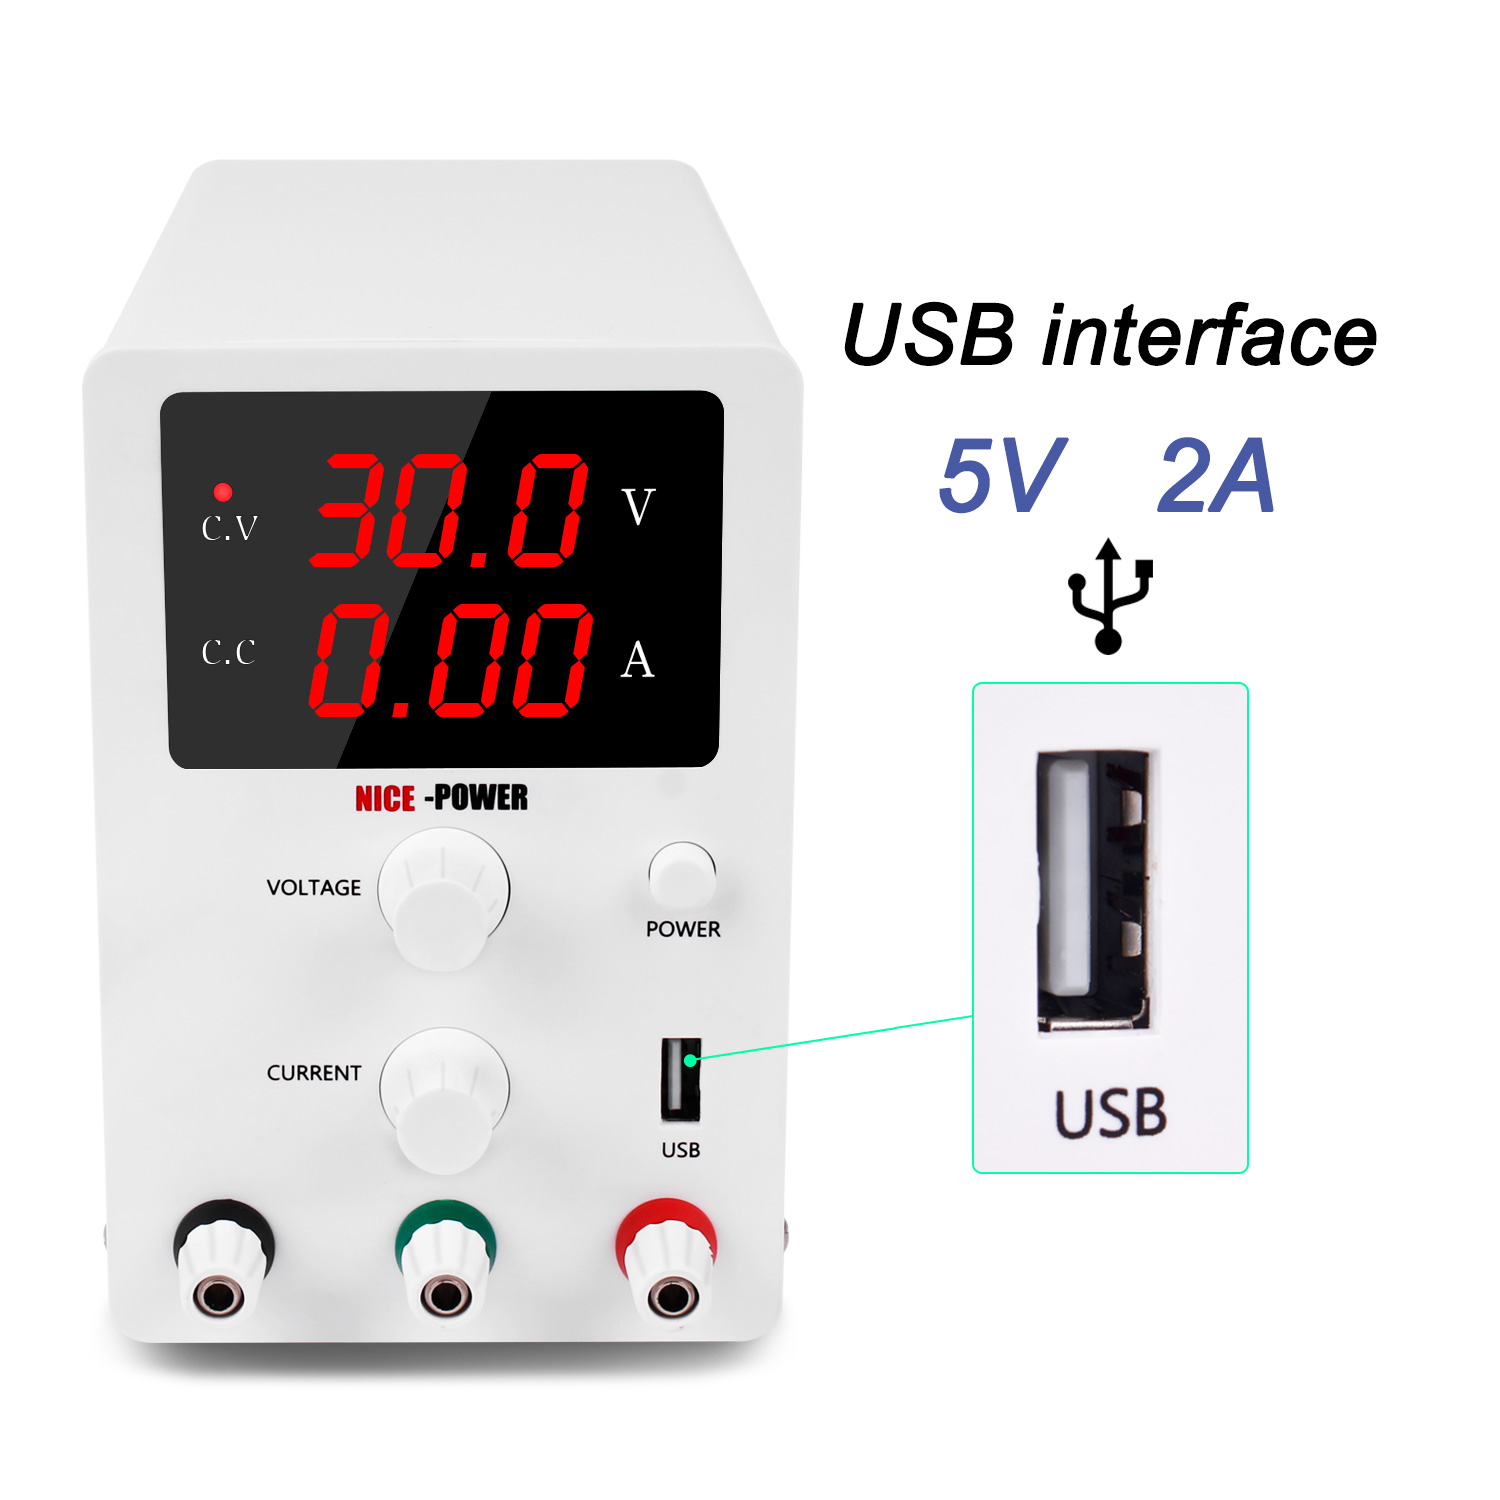 SPS3010 DC Power Supply Voltage-stabilized Source Regulated Power Supply Stabilized Voltage Supply Dual Output Modes LCD Display